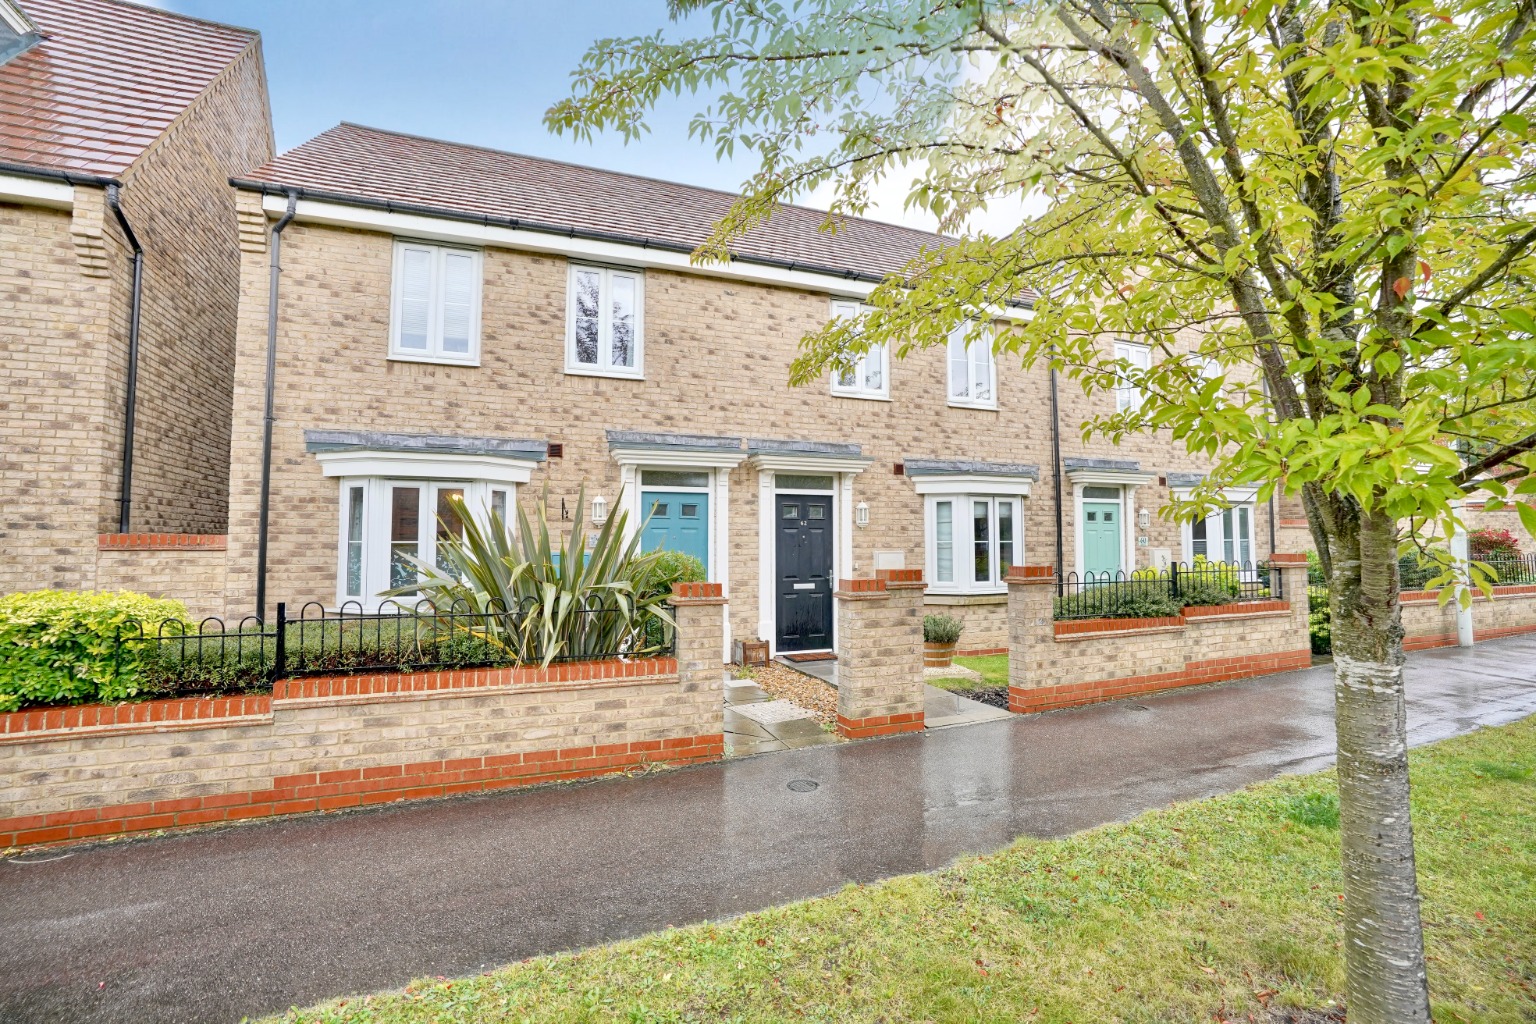 3 bed end of terrace house for sale in Stone Hill, Cambridgeshire - Property Image 1